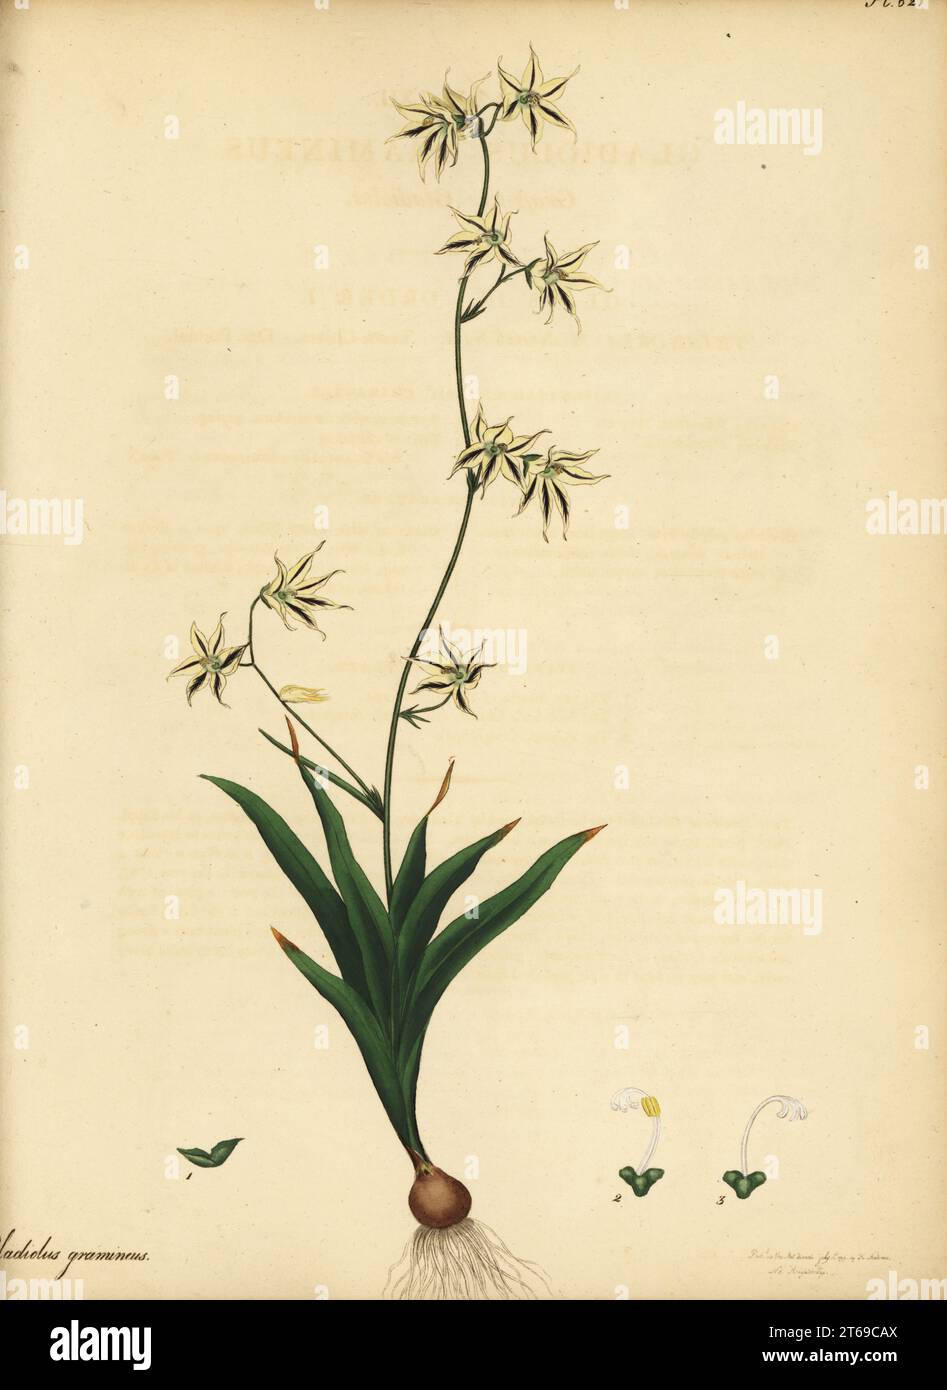 Feeklokkies, Melasphaerula graminea, native to Namibia and Cape Province, South Africa. Grass-like gladiolus, Gladiolus gramineus. Copperplate engraving drawn, engraved and hand-coloured by Henry Andrews from his Botanical Register, Volume 1, published in London, 1799. Stock Photo